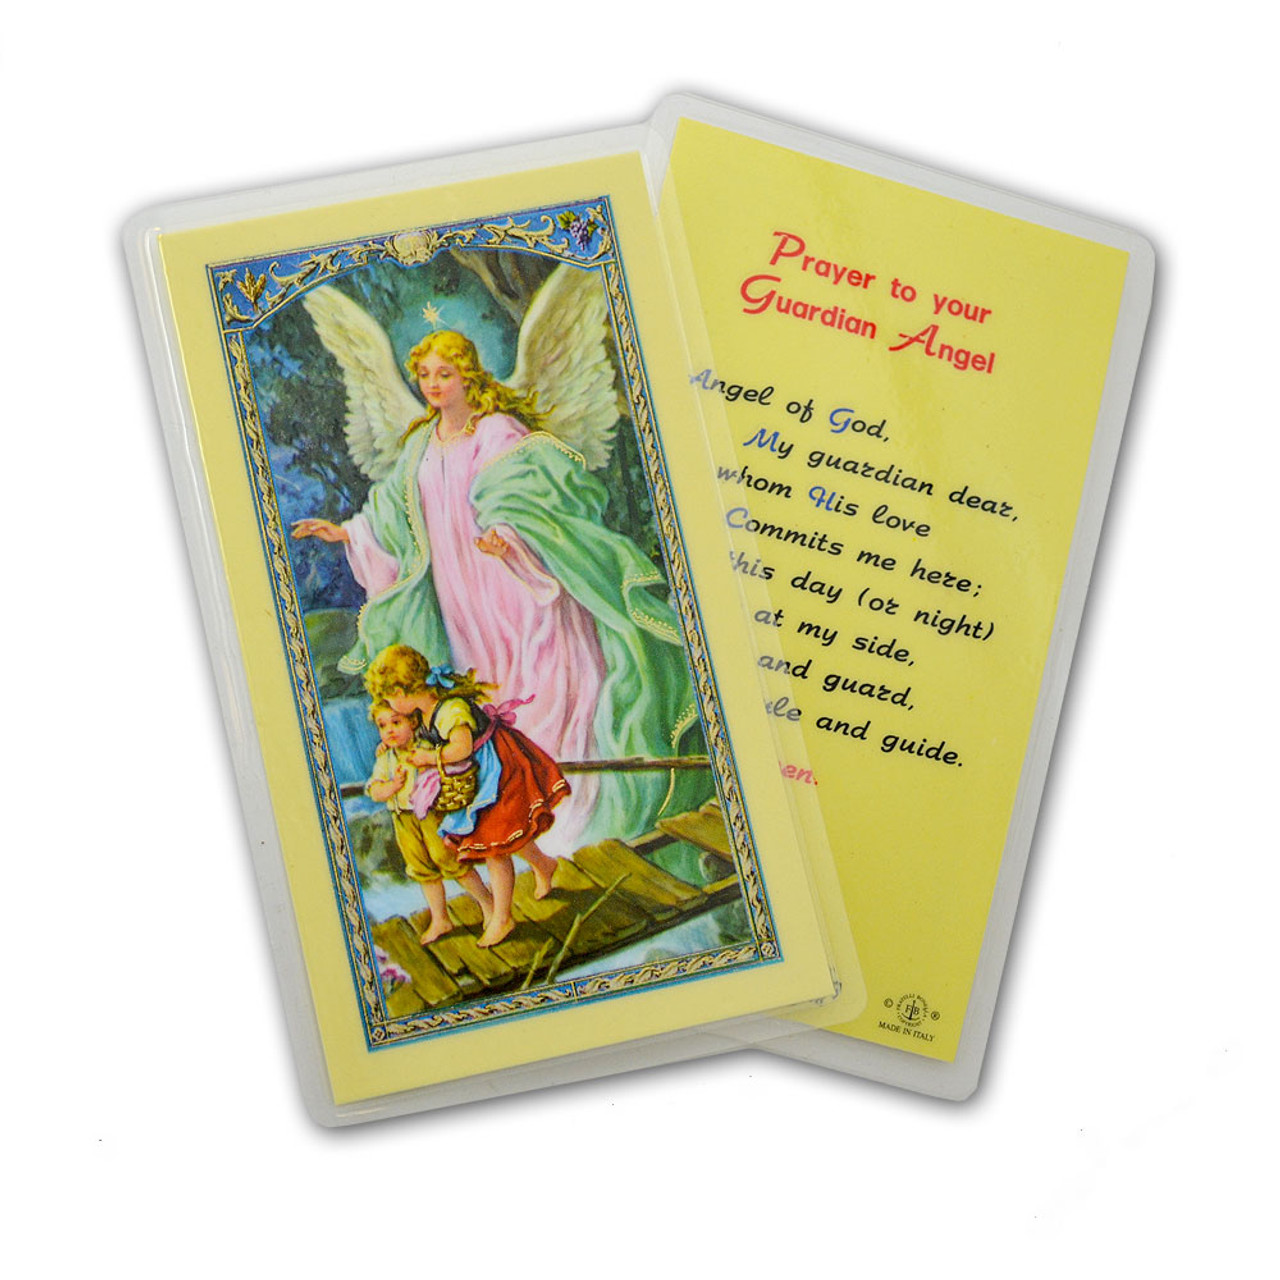 Guardian　Card　Angel　Your　Guild　Prayer　Laminated　St.　to　Holy　Patrick's